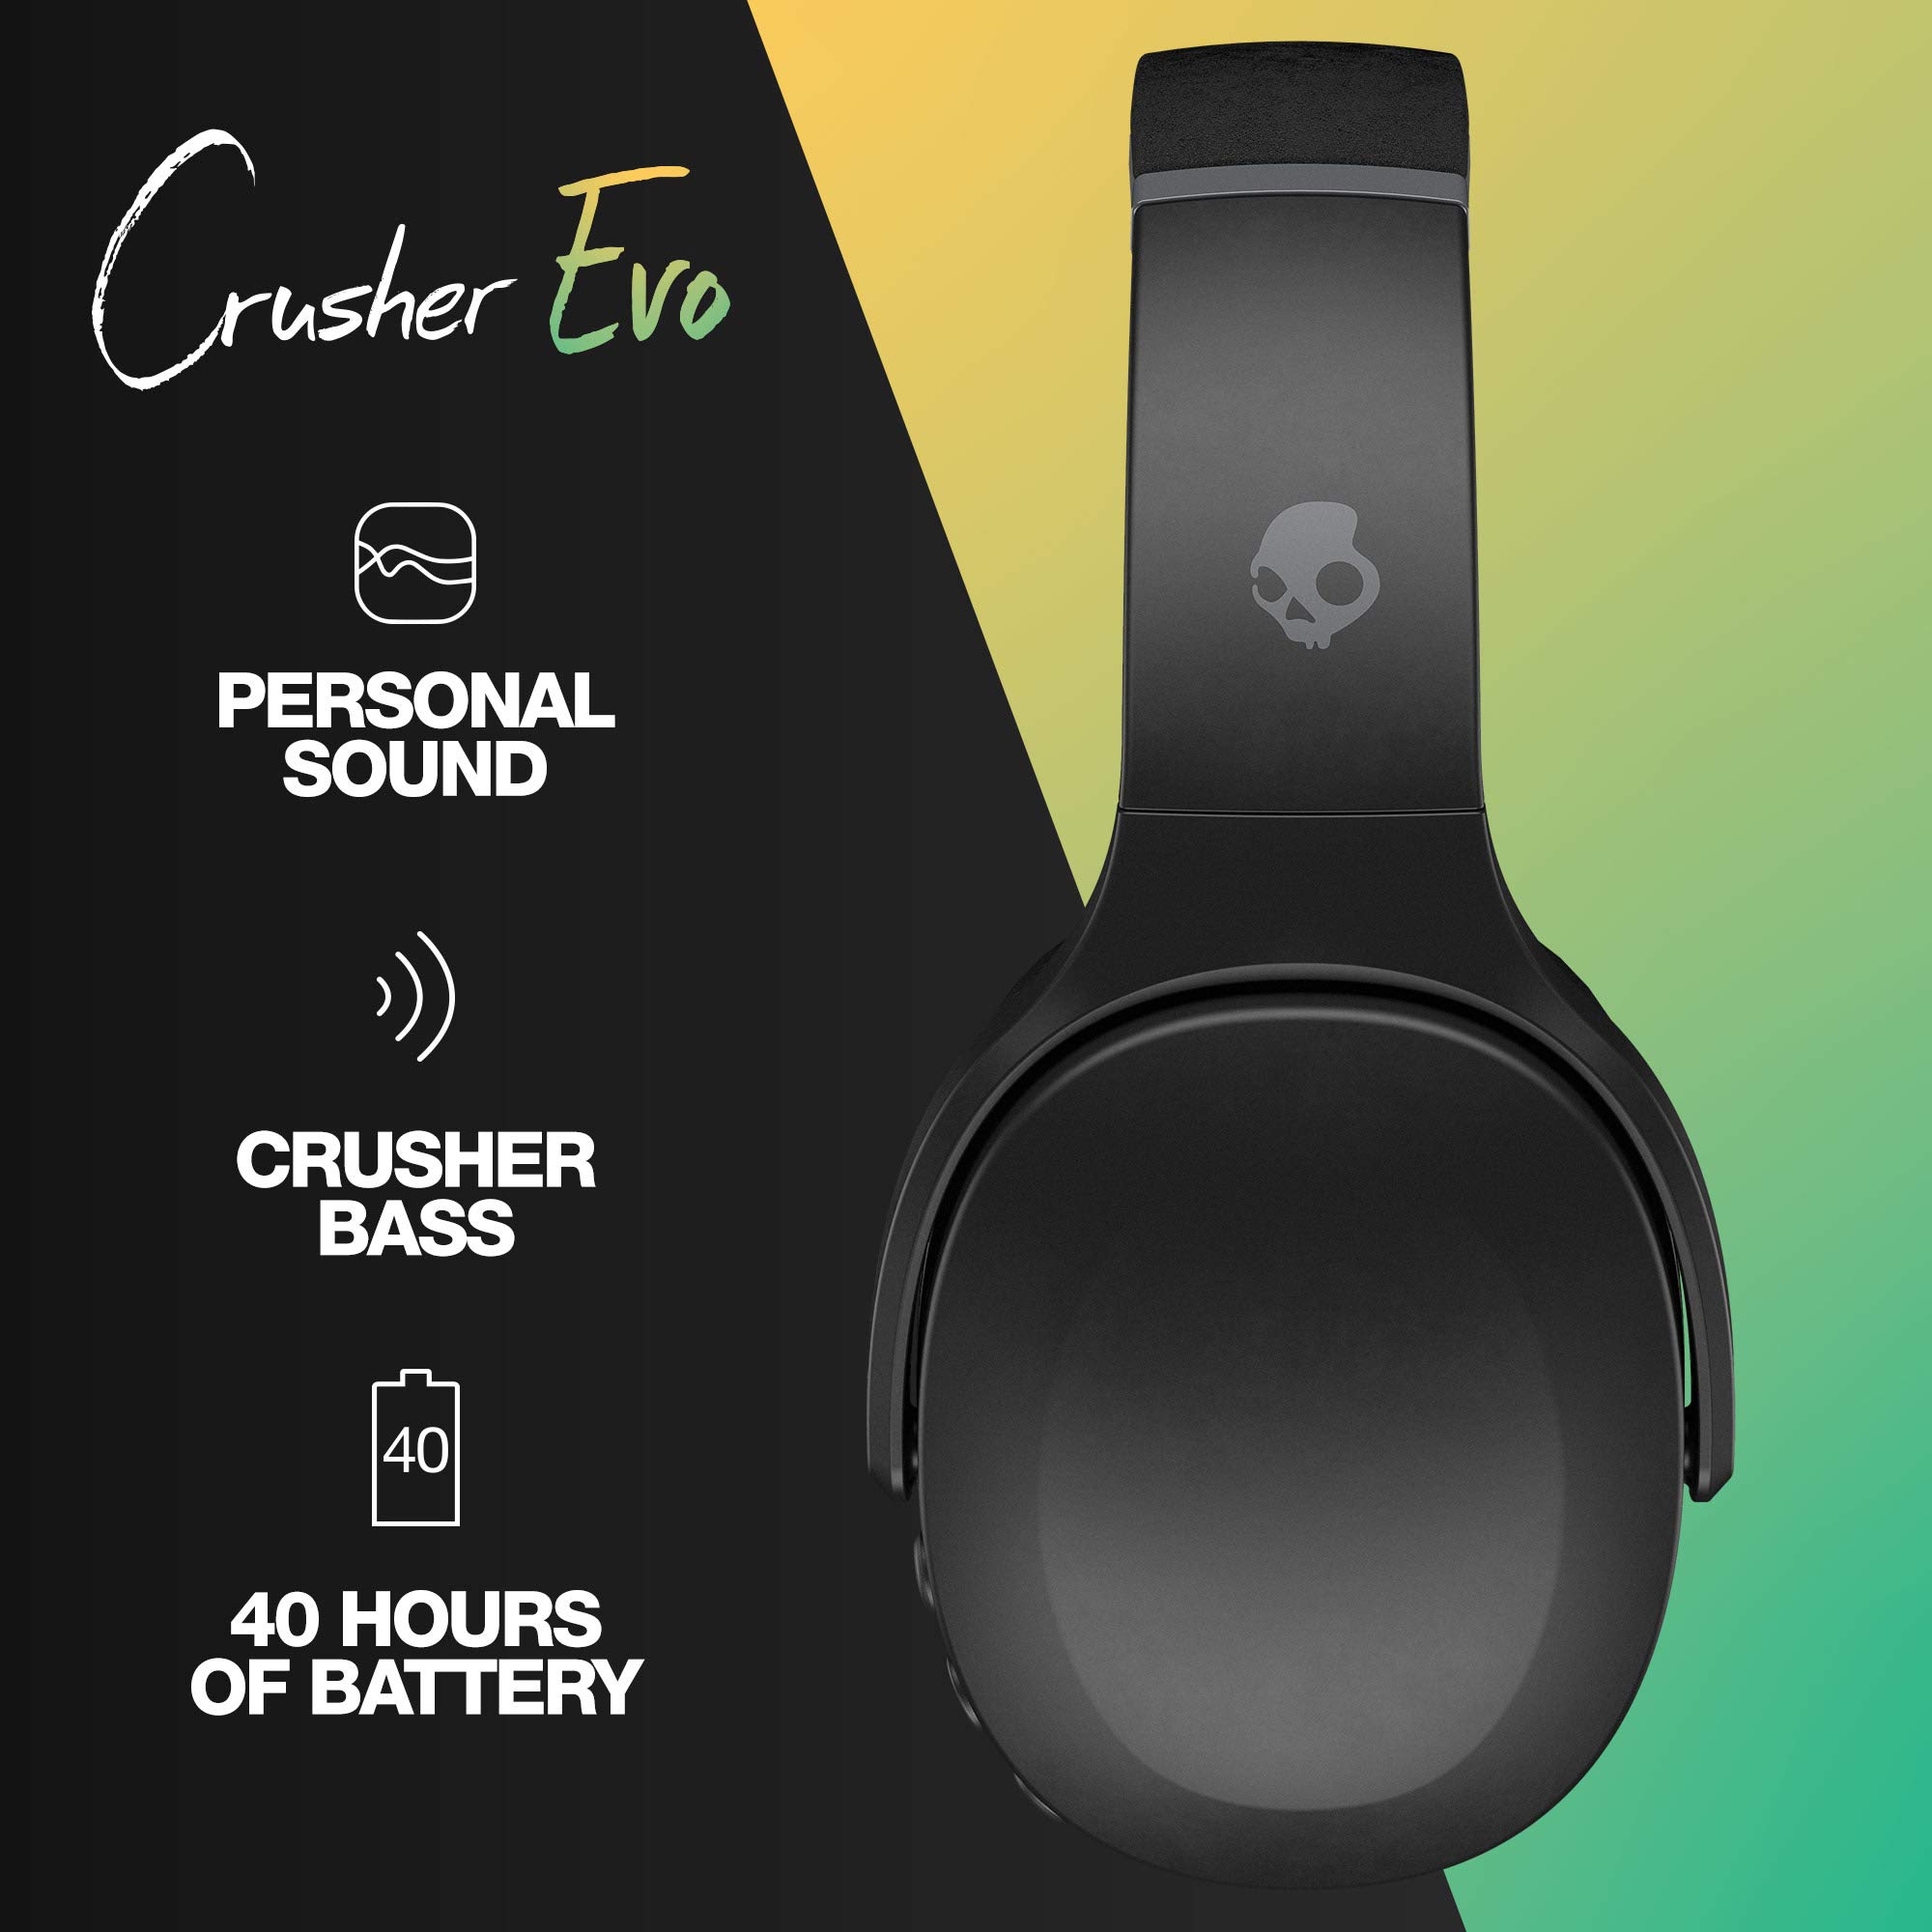 Skullcandy Crusher Evo Wireless Over-Ear Bluetooth Headphones with Microphone, for iPhone and Android, 40 Hour Battery Life, Extra Bass Tech - Bonus Line USB-C Cable,Black